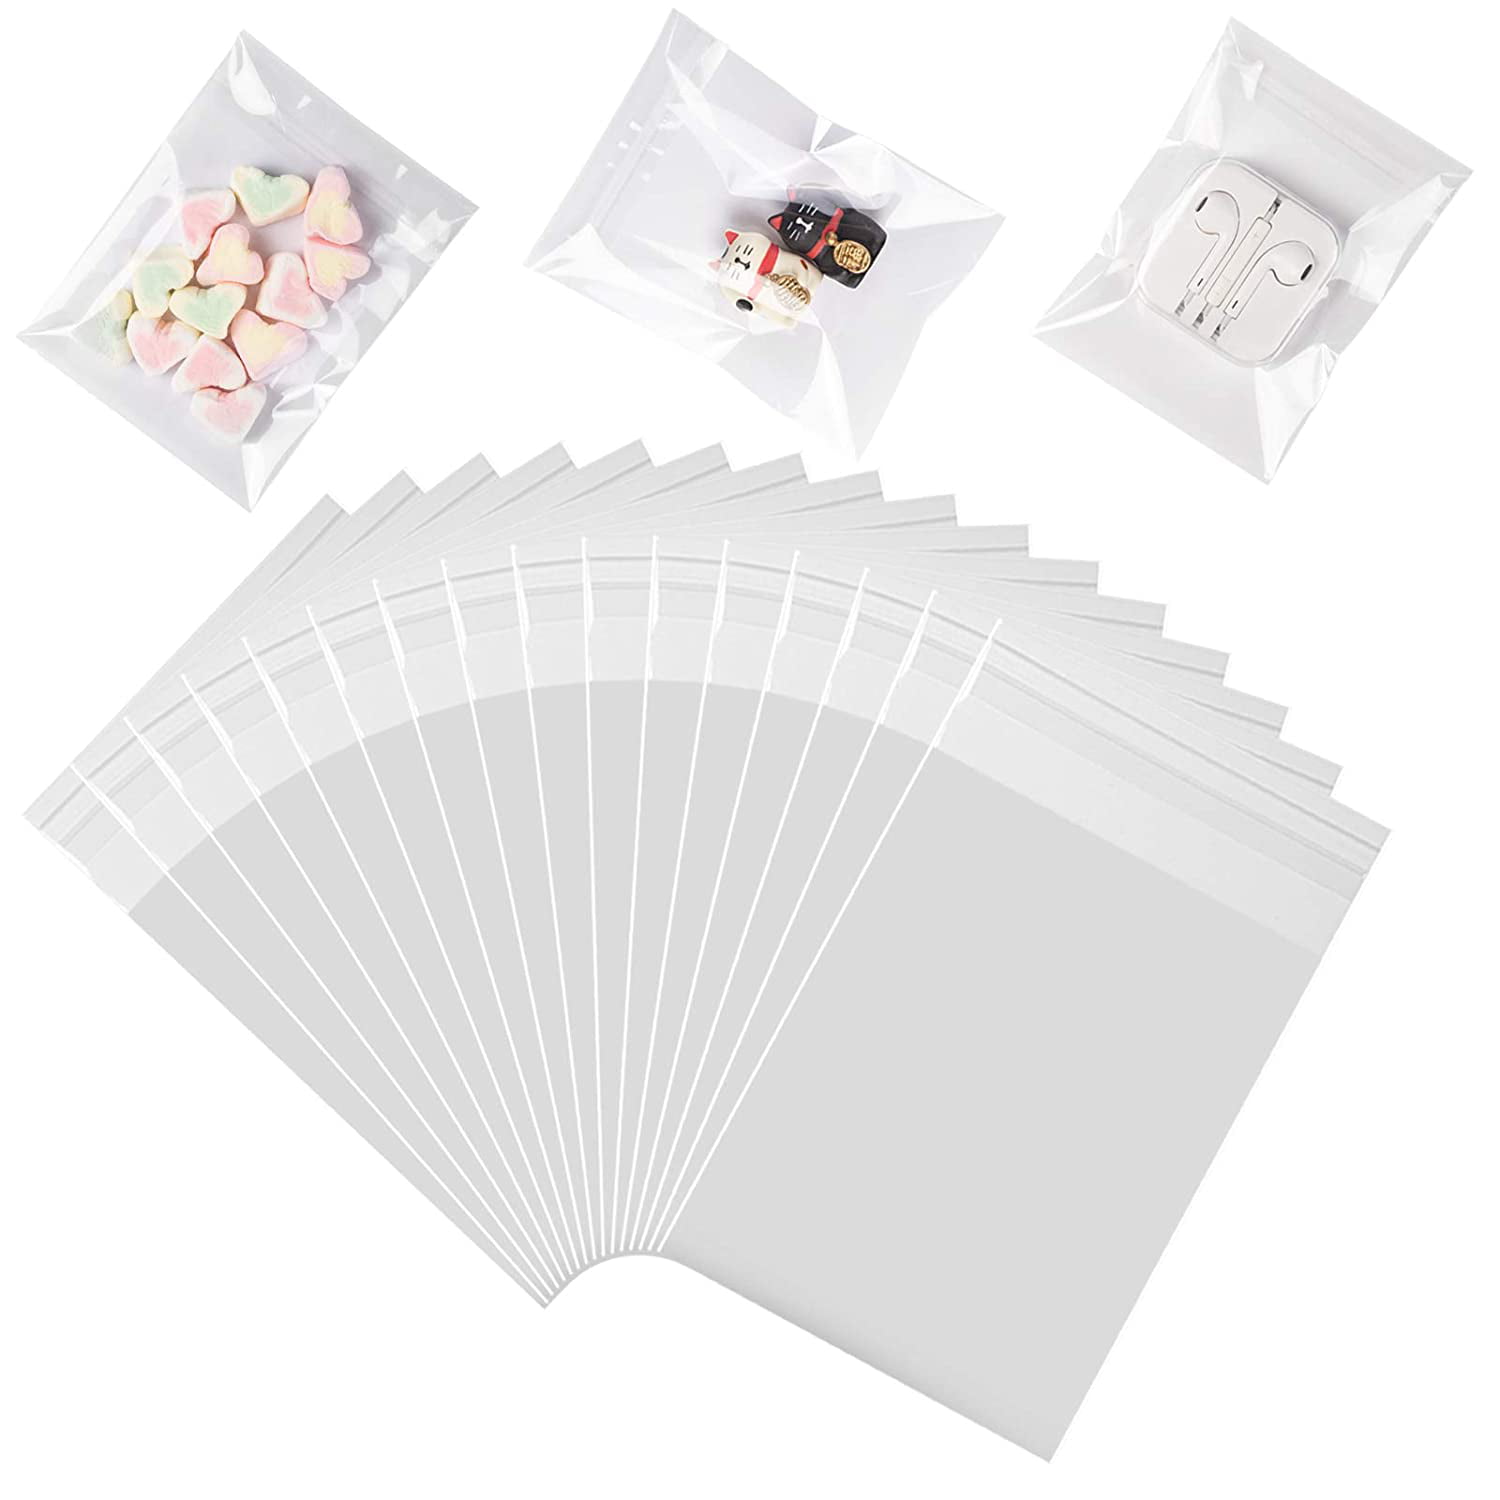 300 pcs Clear Poly Bags Self Adhesive Sealing Plastic Packaging Bags Many Size 